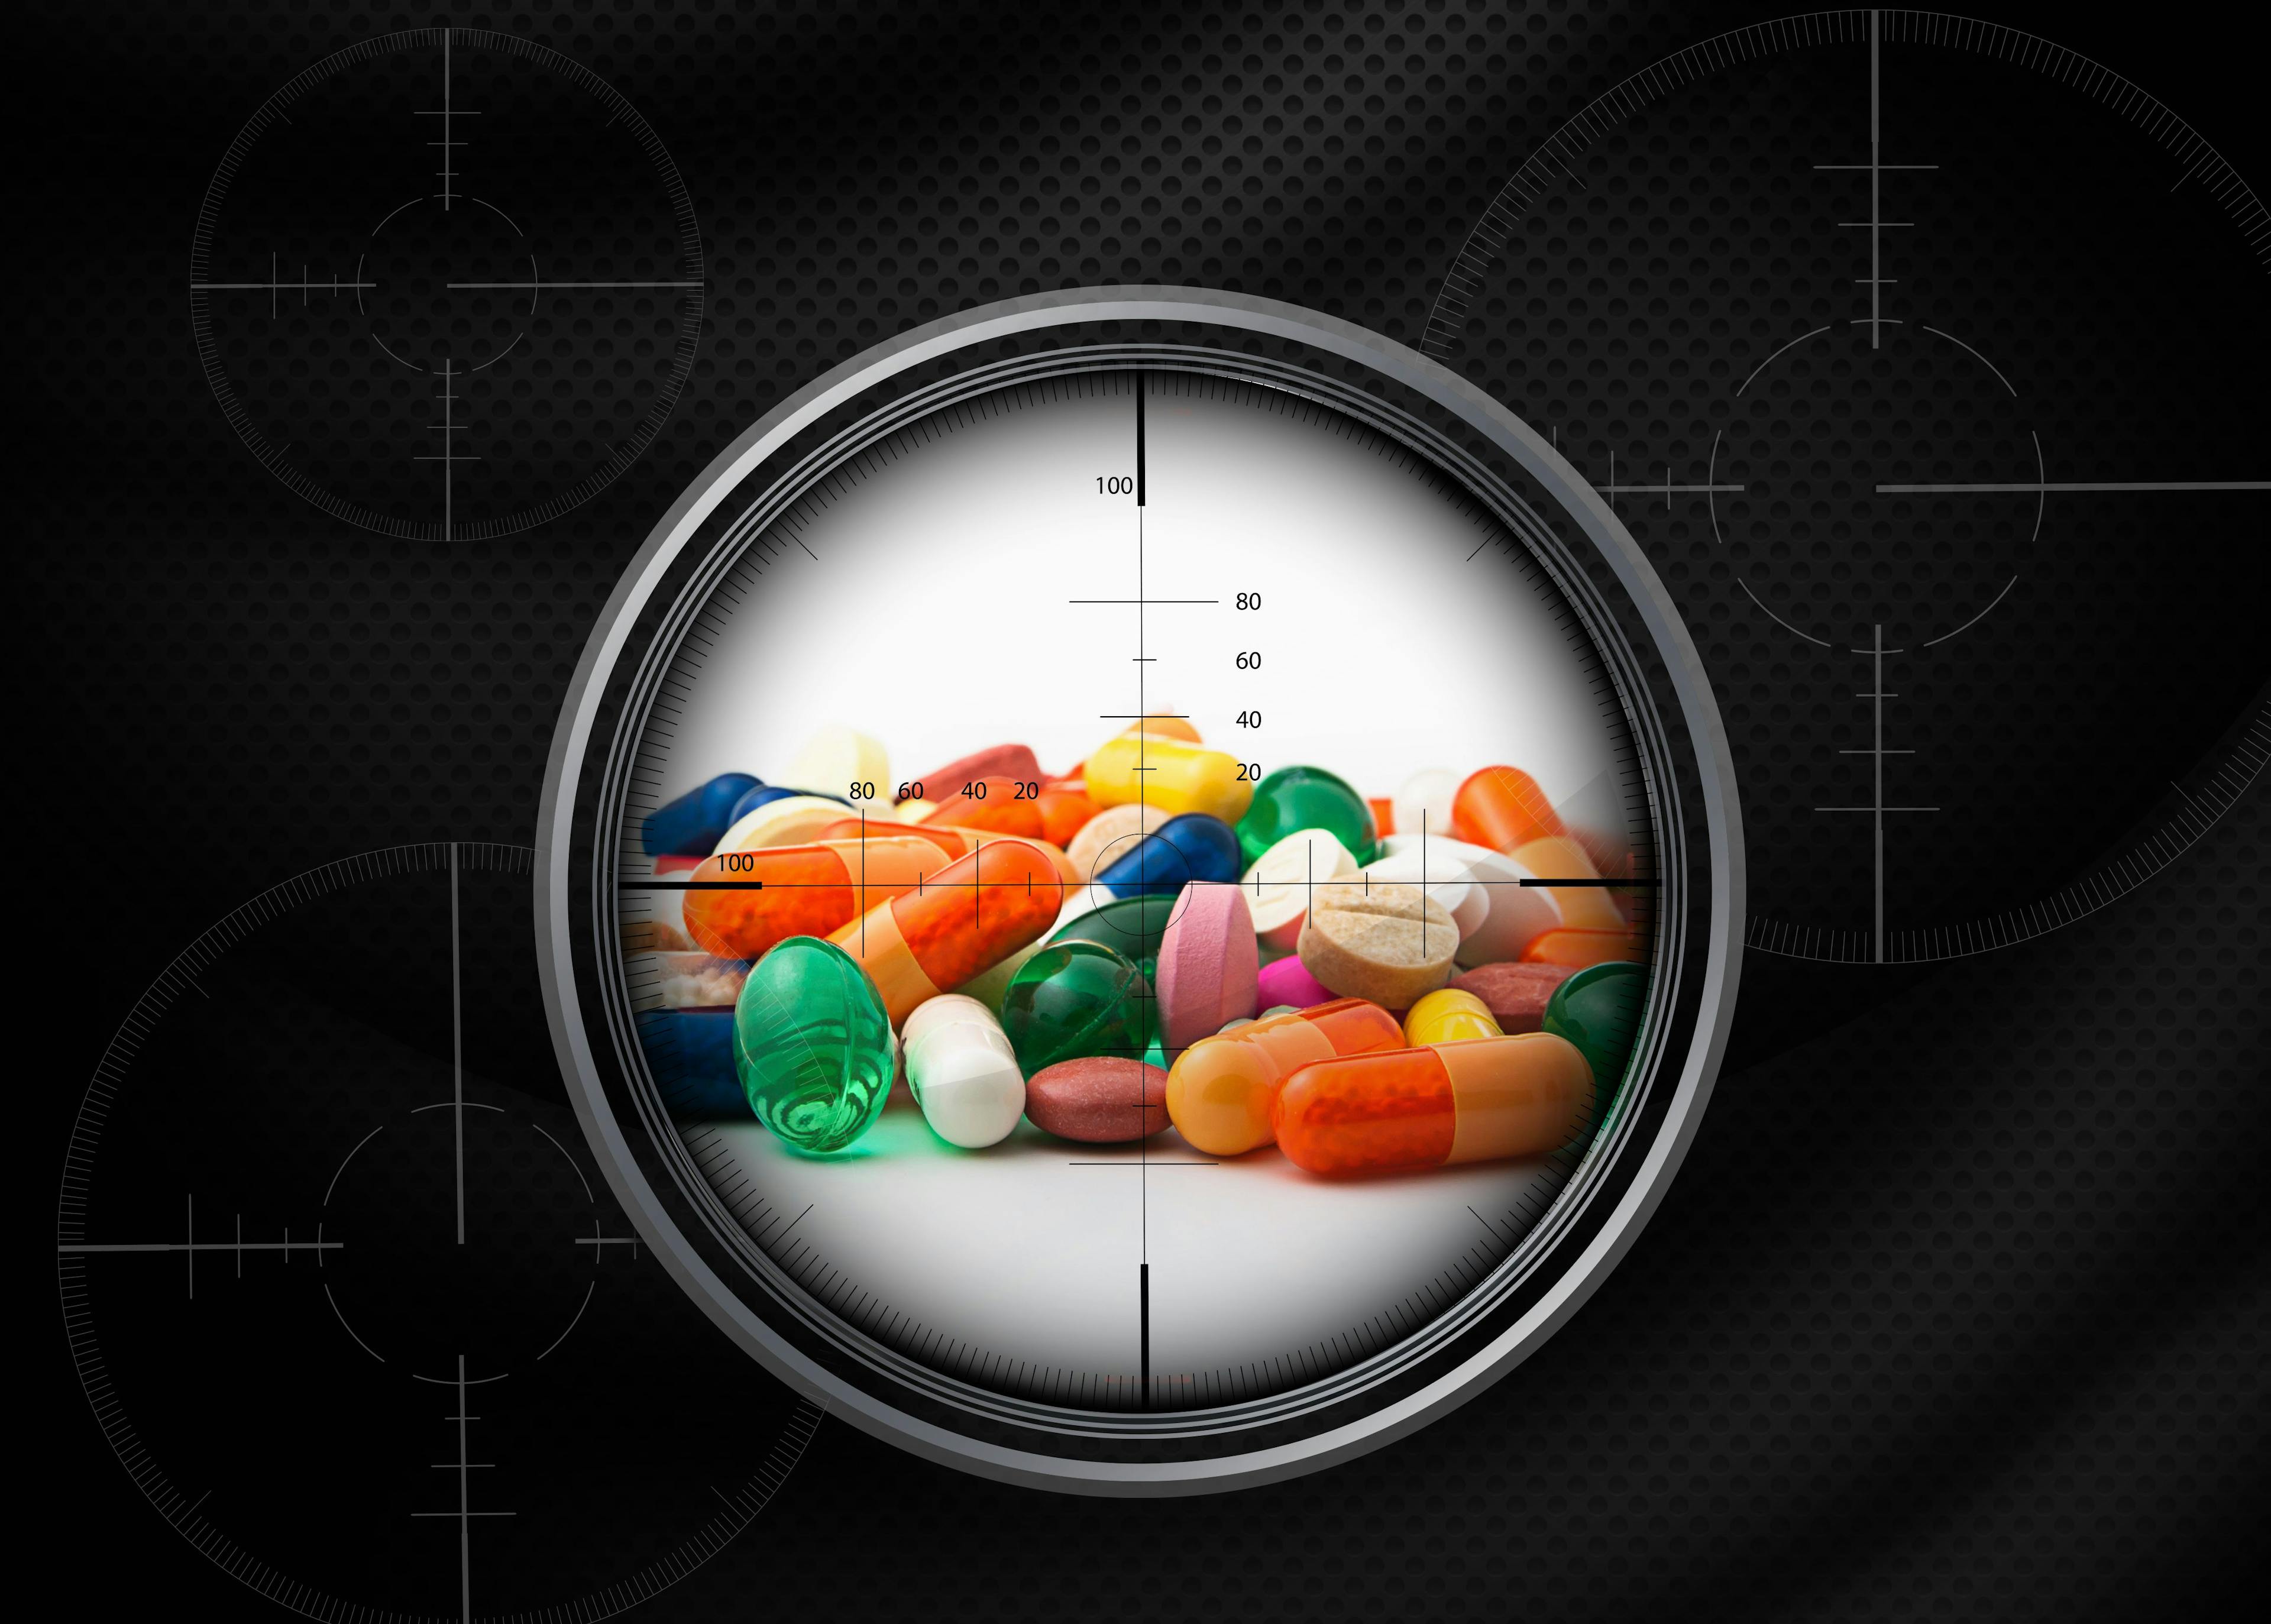 Dietary Supplement Industry in the Crosshairs: Takeaways from the New York Attorney General Investigation